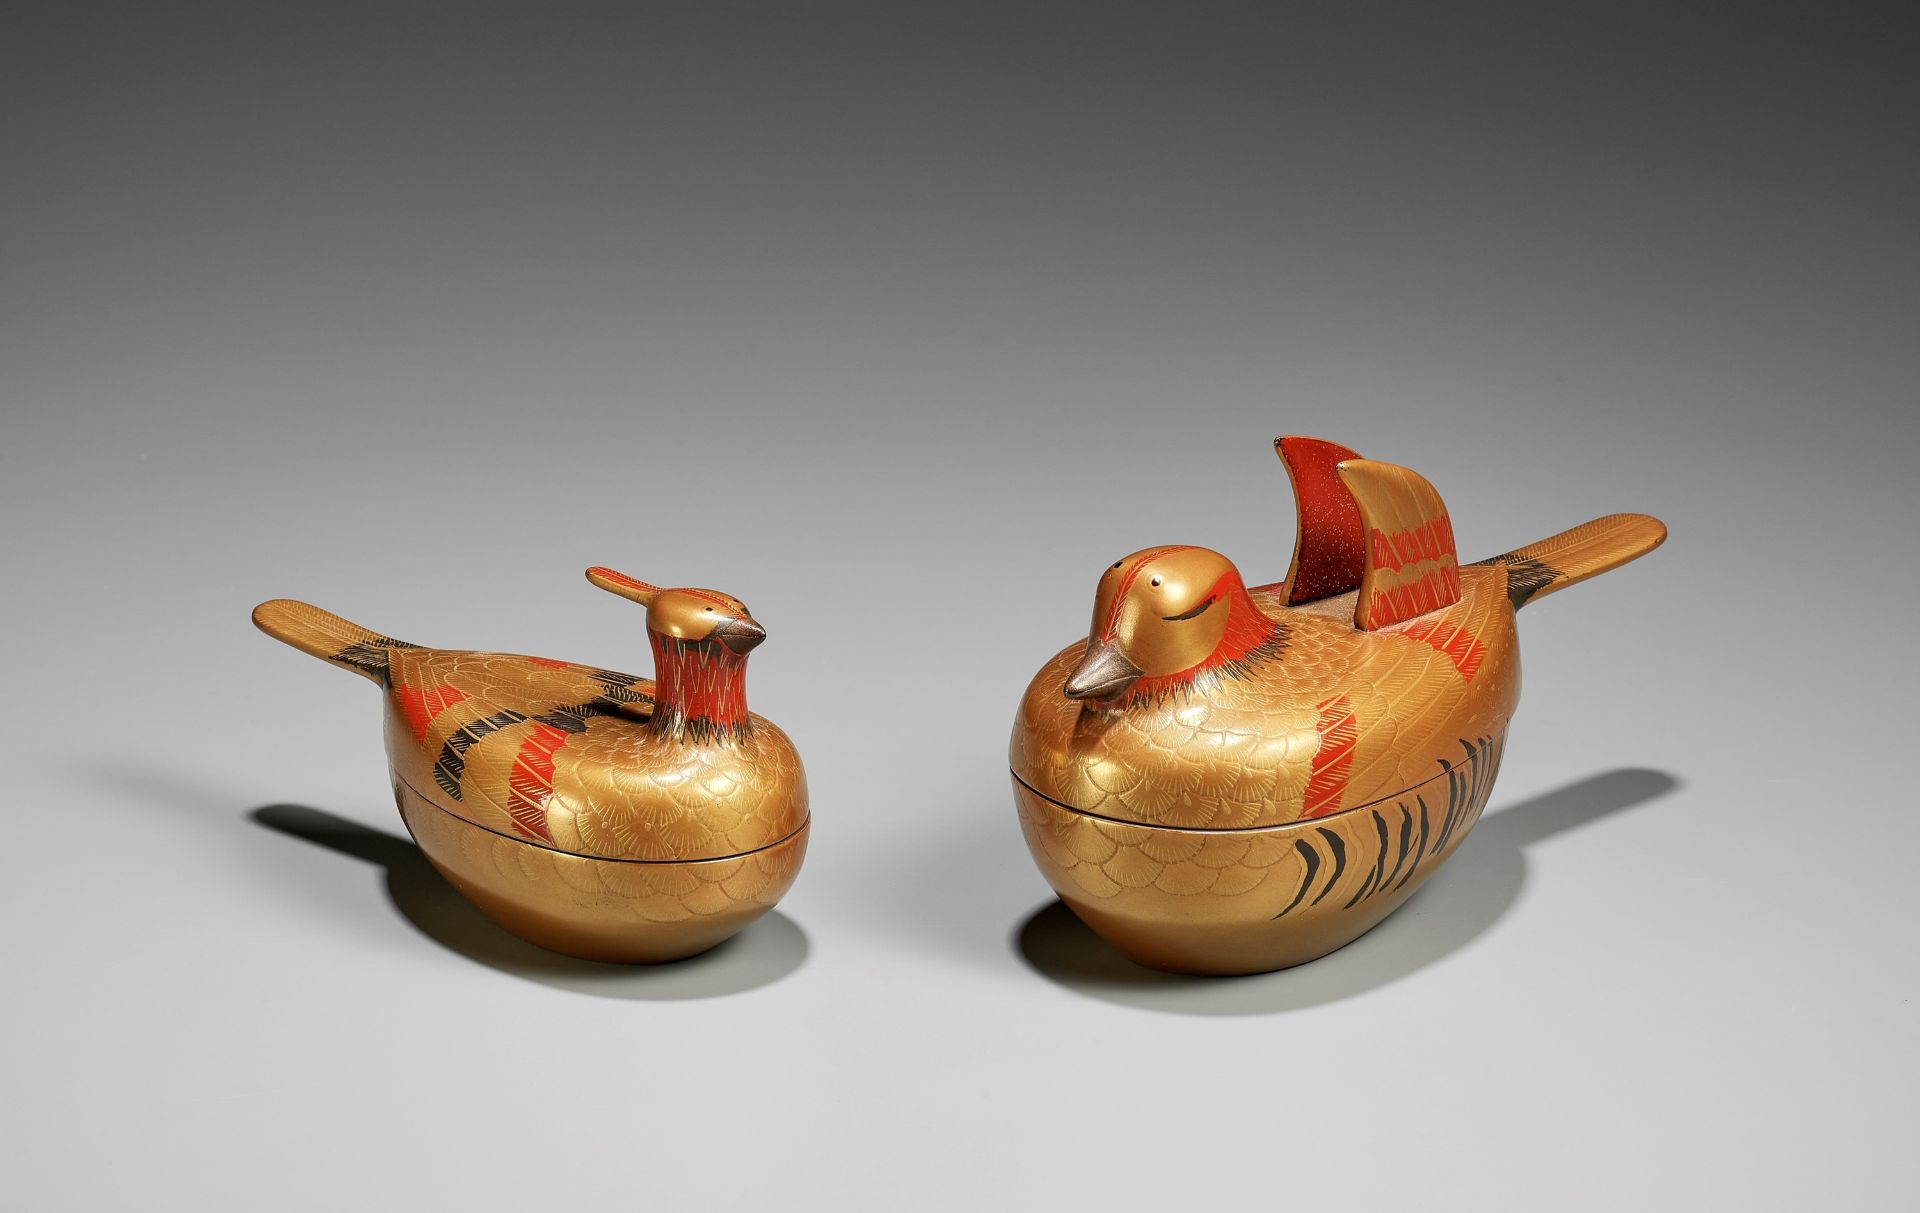 A PAIR OF GOLD LACQUER DUCK-FORM KOGO (INCENSE BOXES) AND COVERS